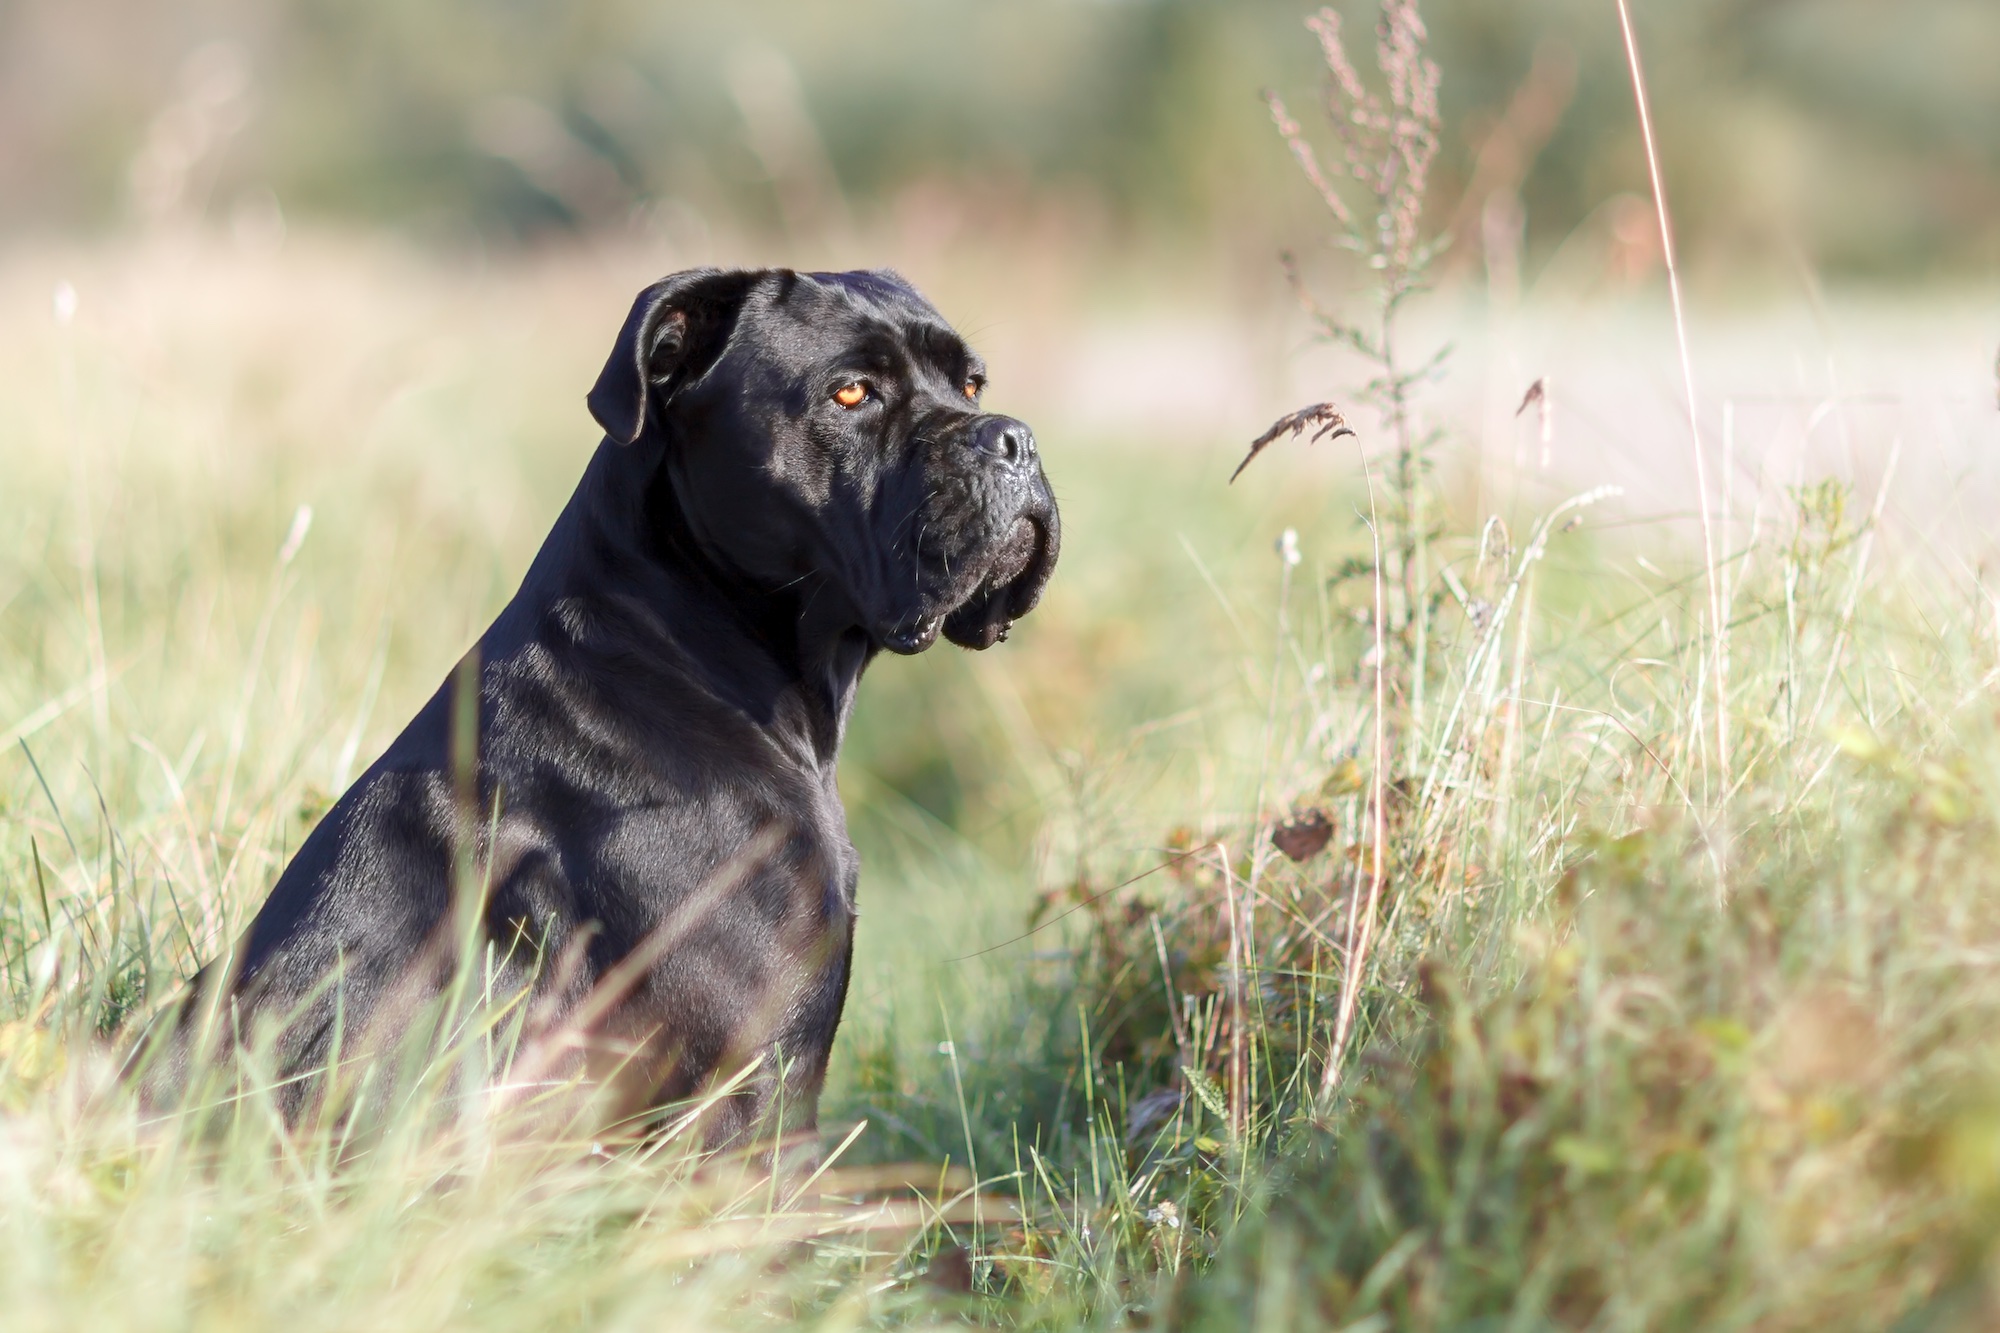 Blue Blood Cane Corso  Dog Breed Facts and Information - Wag! Dog